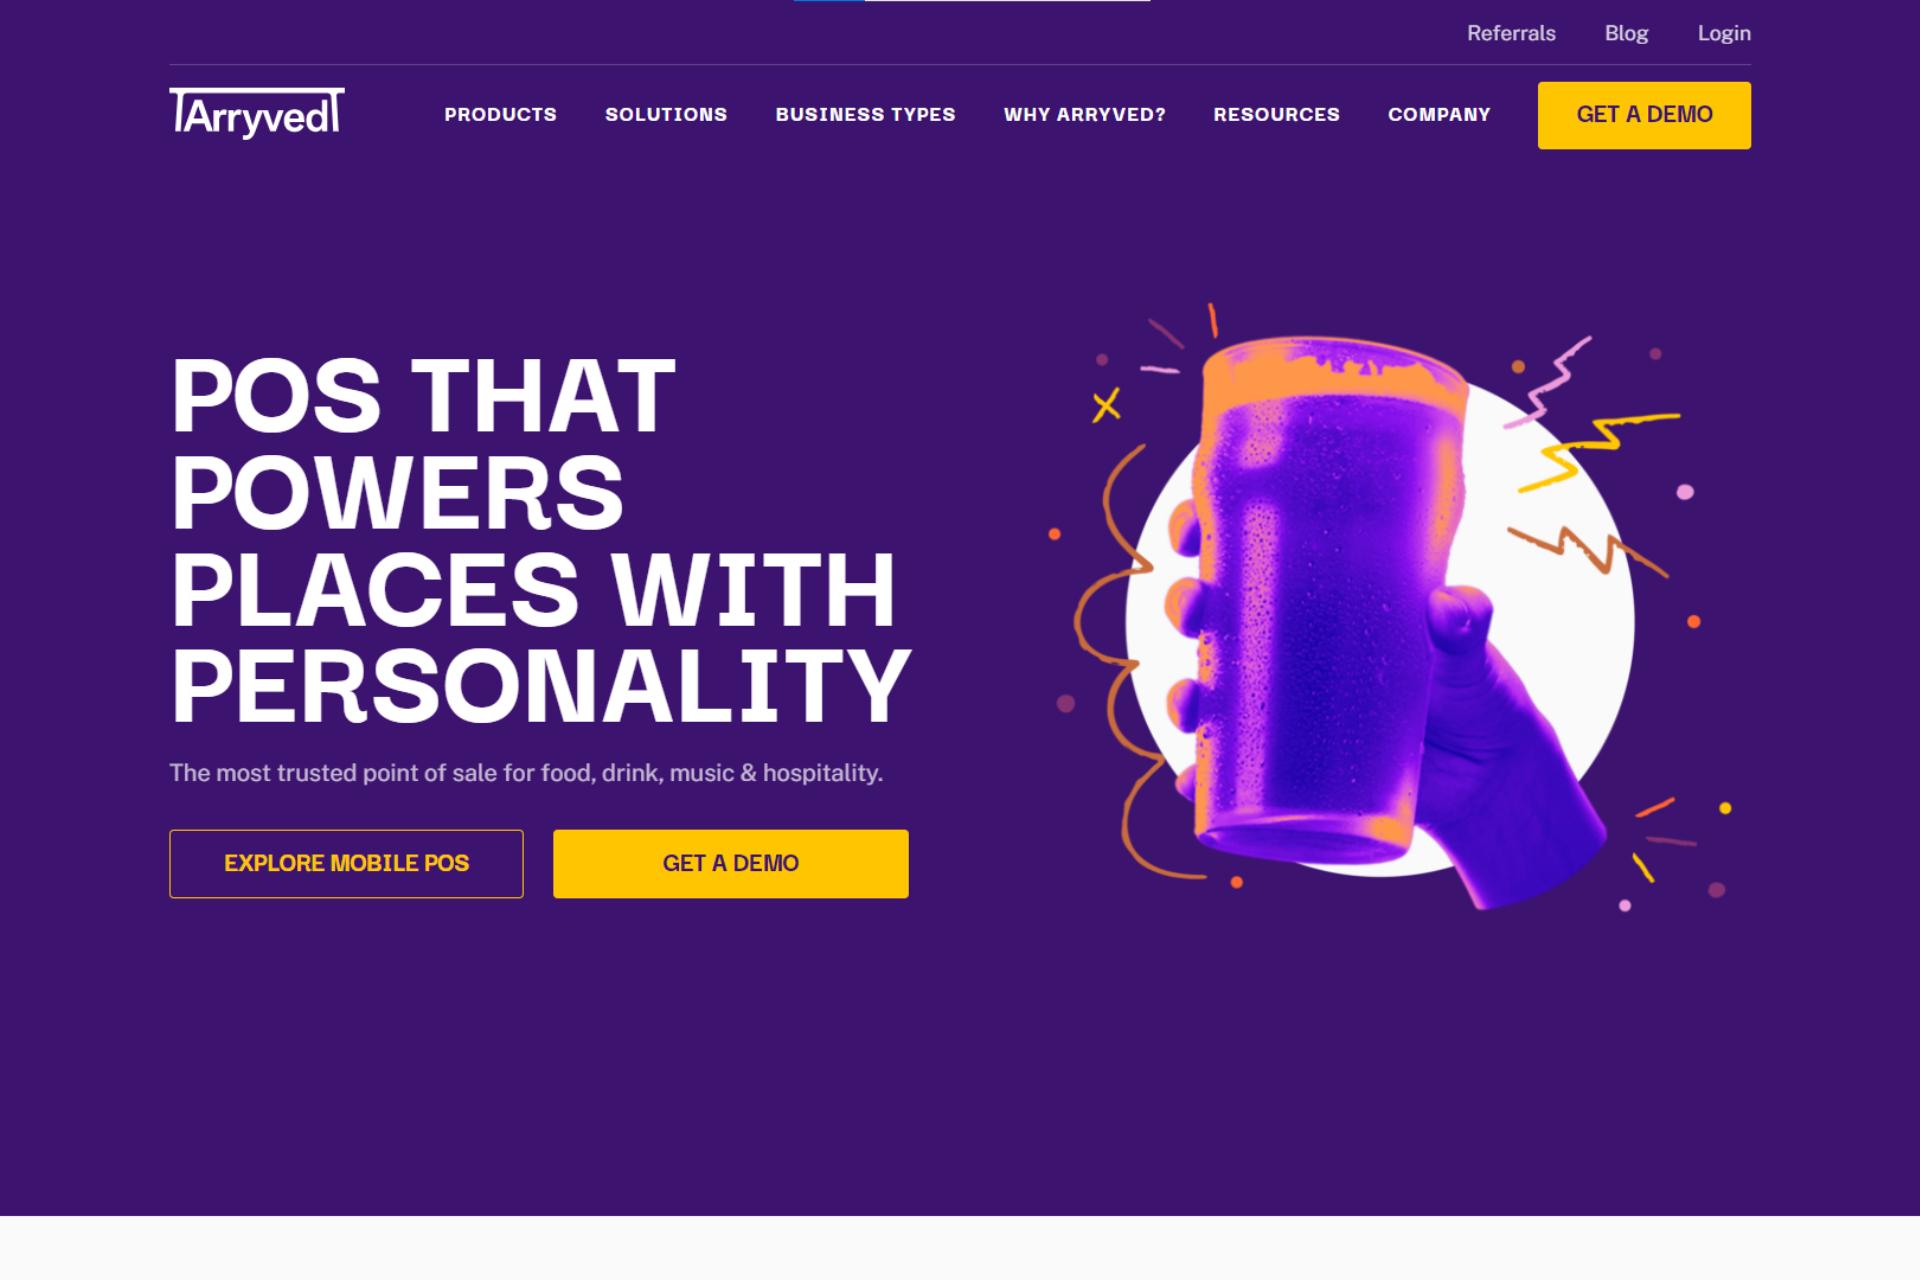 Arryved pos for taprooms and bars landing page